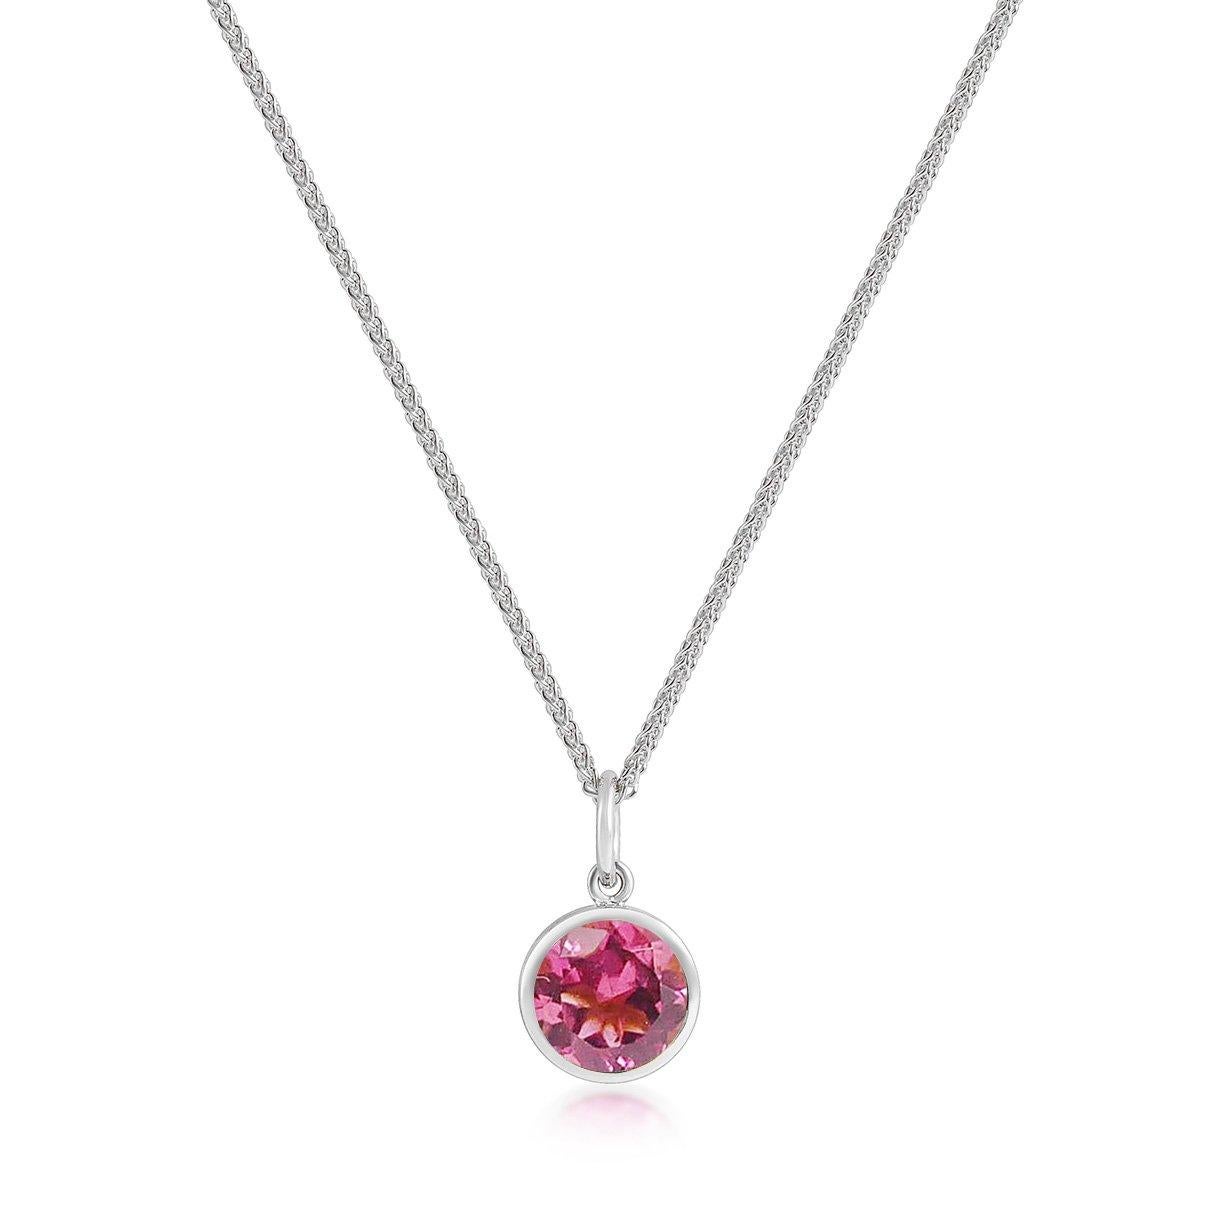 Round Cut Handcrafted 1.30 Carats Pink Tourmaline 18 Karat White Gold Pendant Necklace For Sale